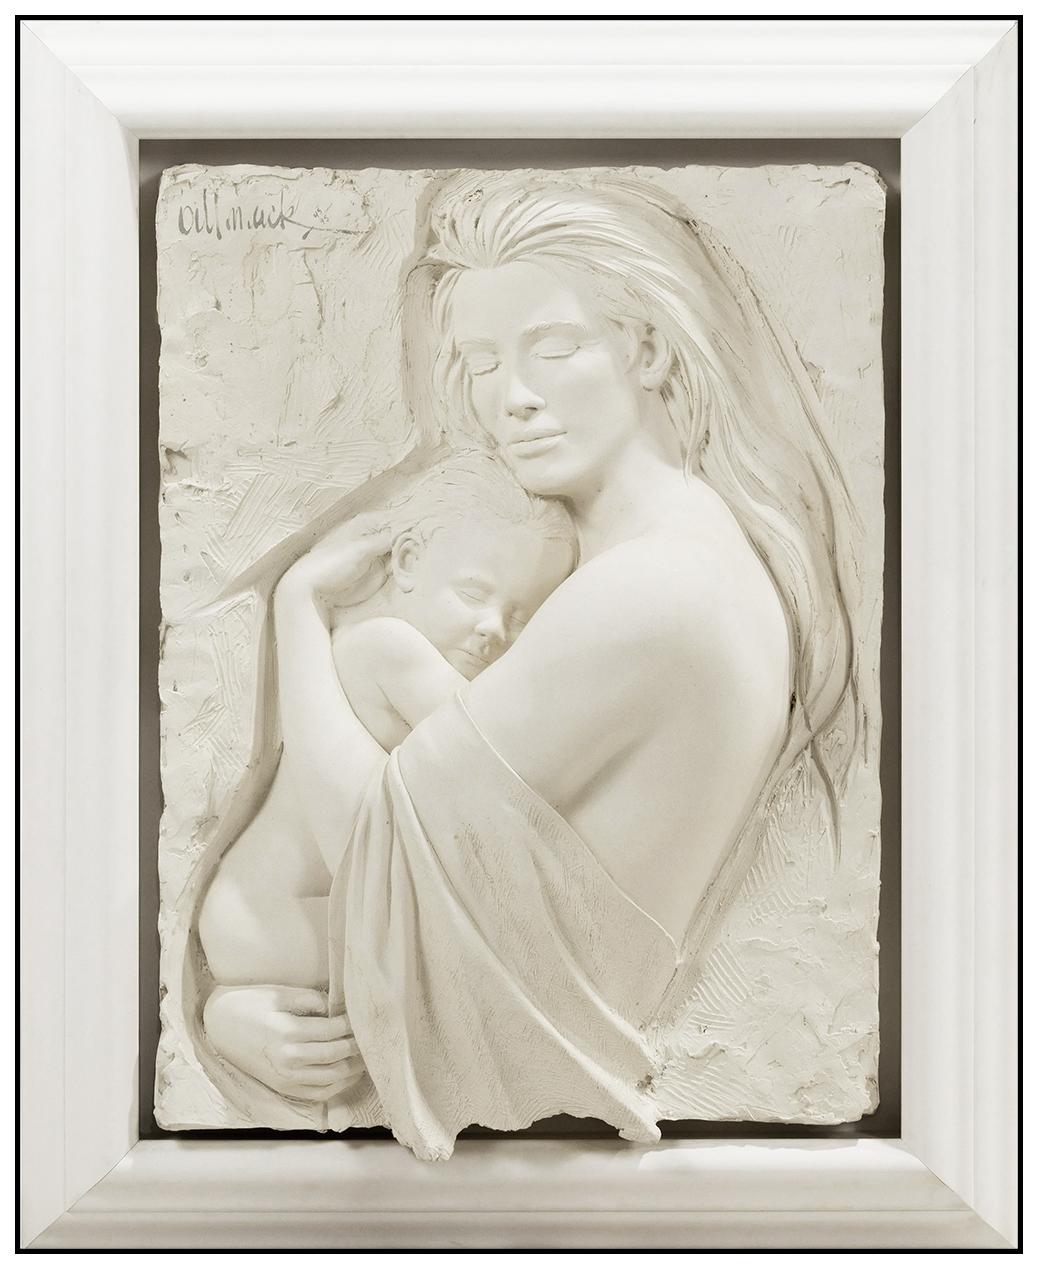 Bill Mack Large & Authentic Bonded Sand Sculpture "Tenderness", Professionally Custom Framed and listed with the Submit Best Offer option

Accepting Offers Now:  Here we have something a Bonded Sand Sculpture by Bill Mack titled "Tenderness", of a